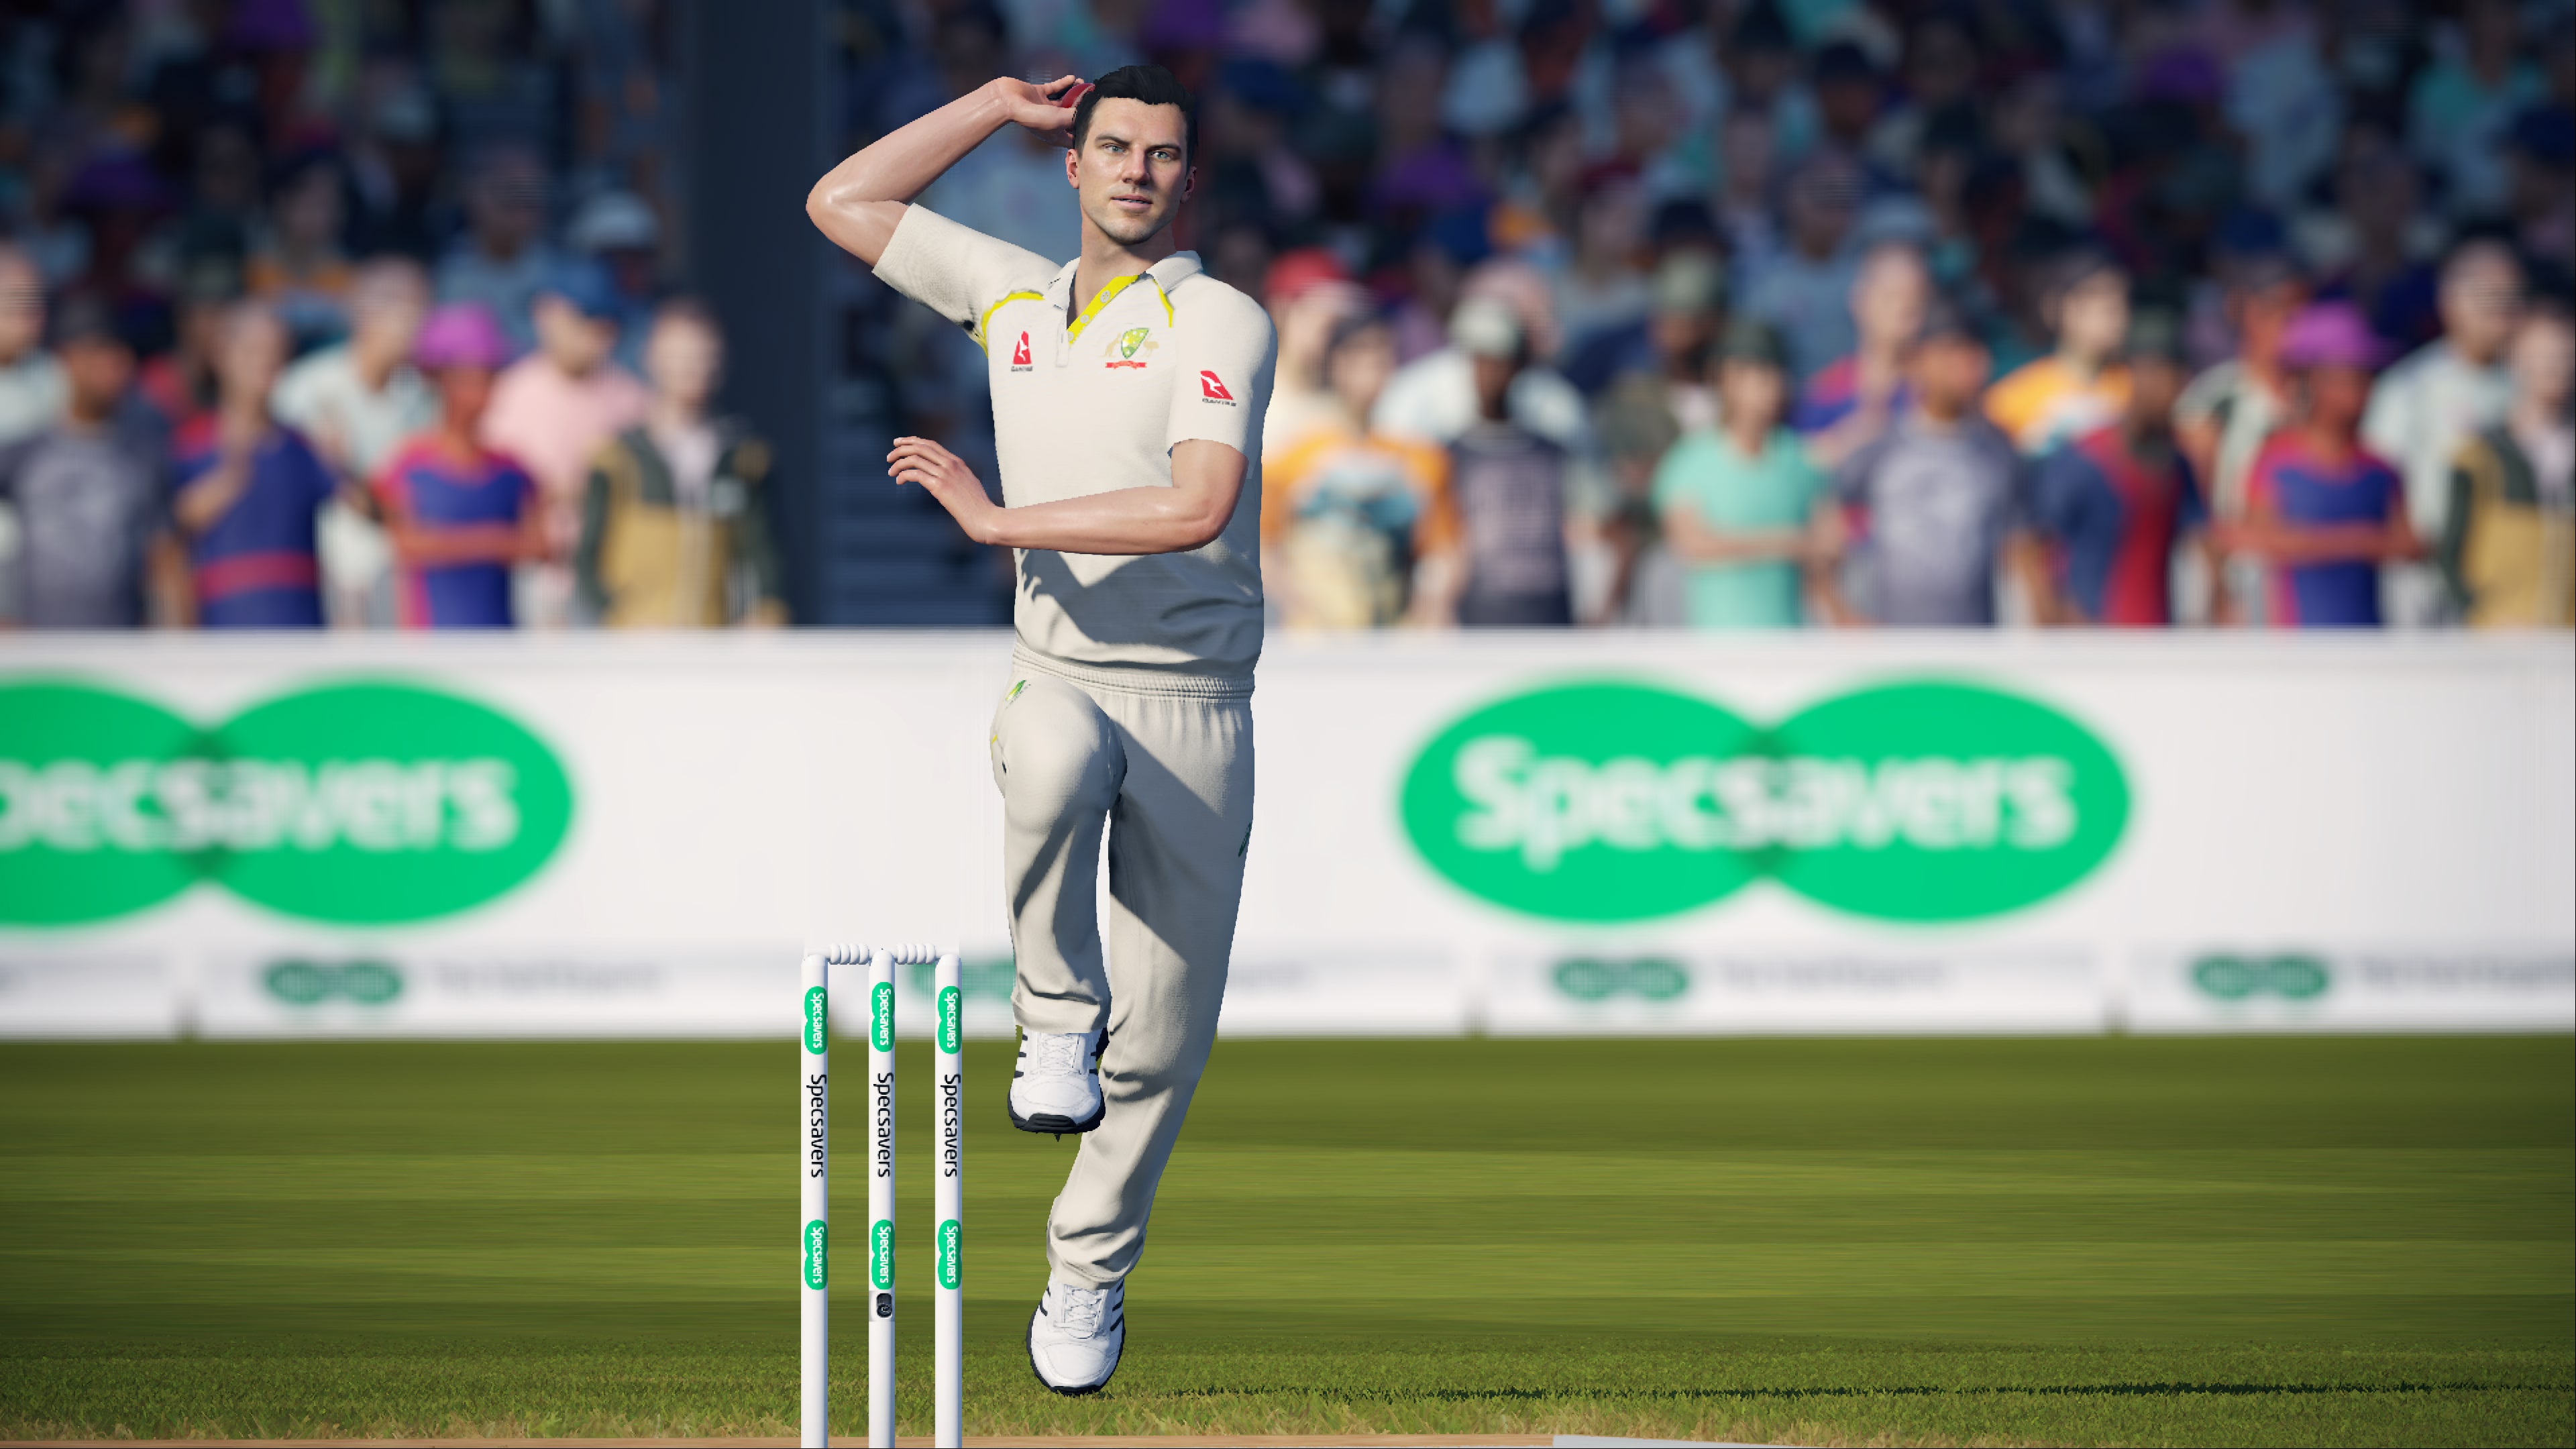 vr cricket game ps4